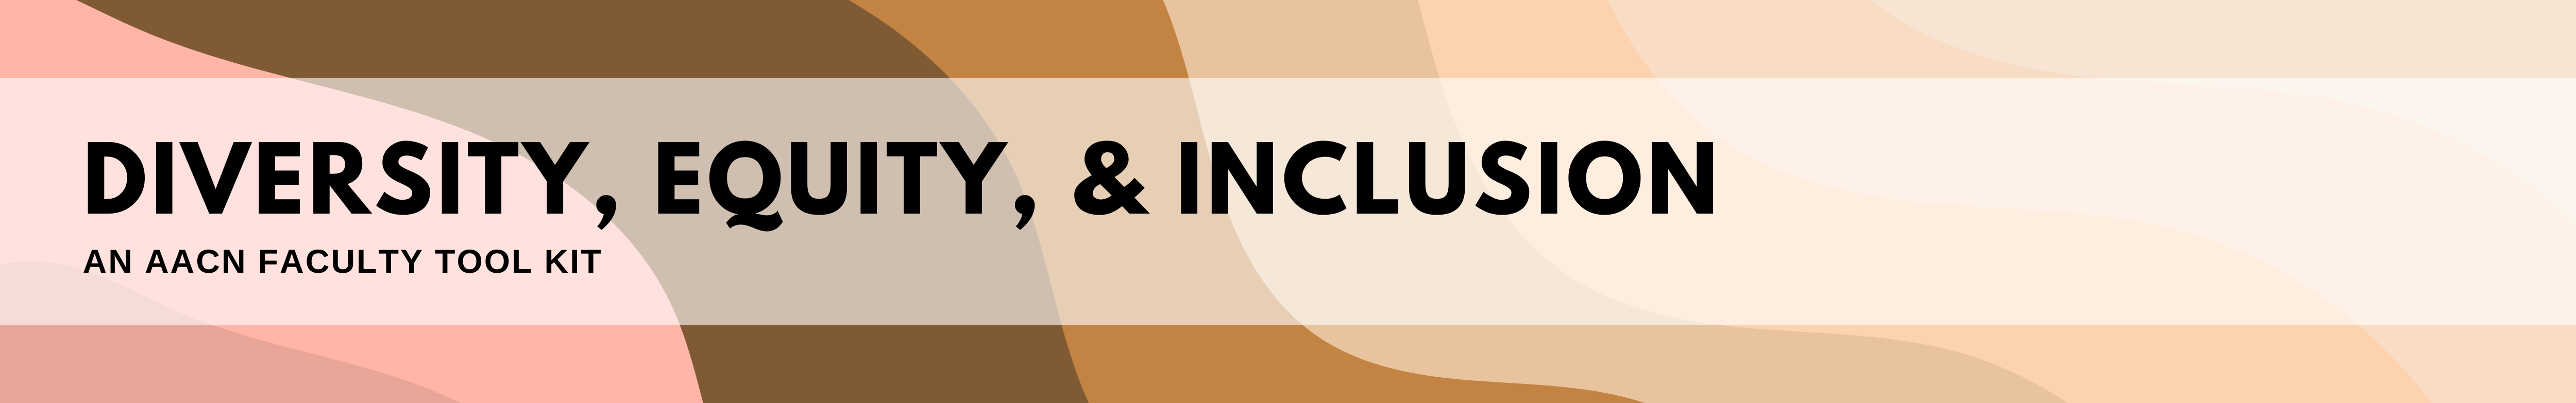 diversity, equity, & inclusion | An AACN Faculty Tool Kit